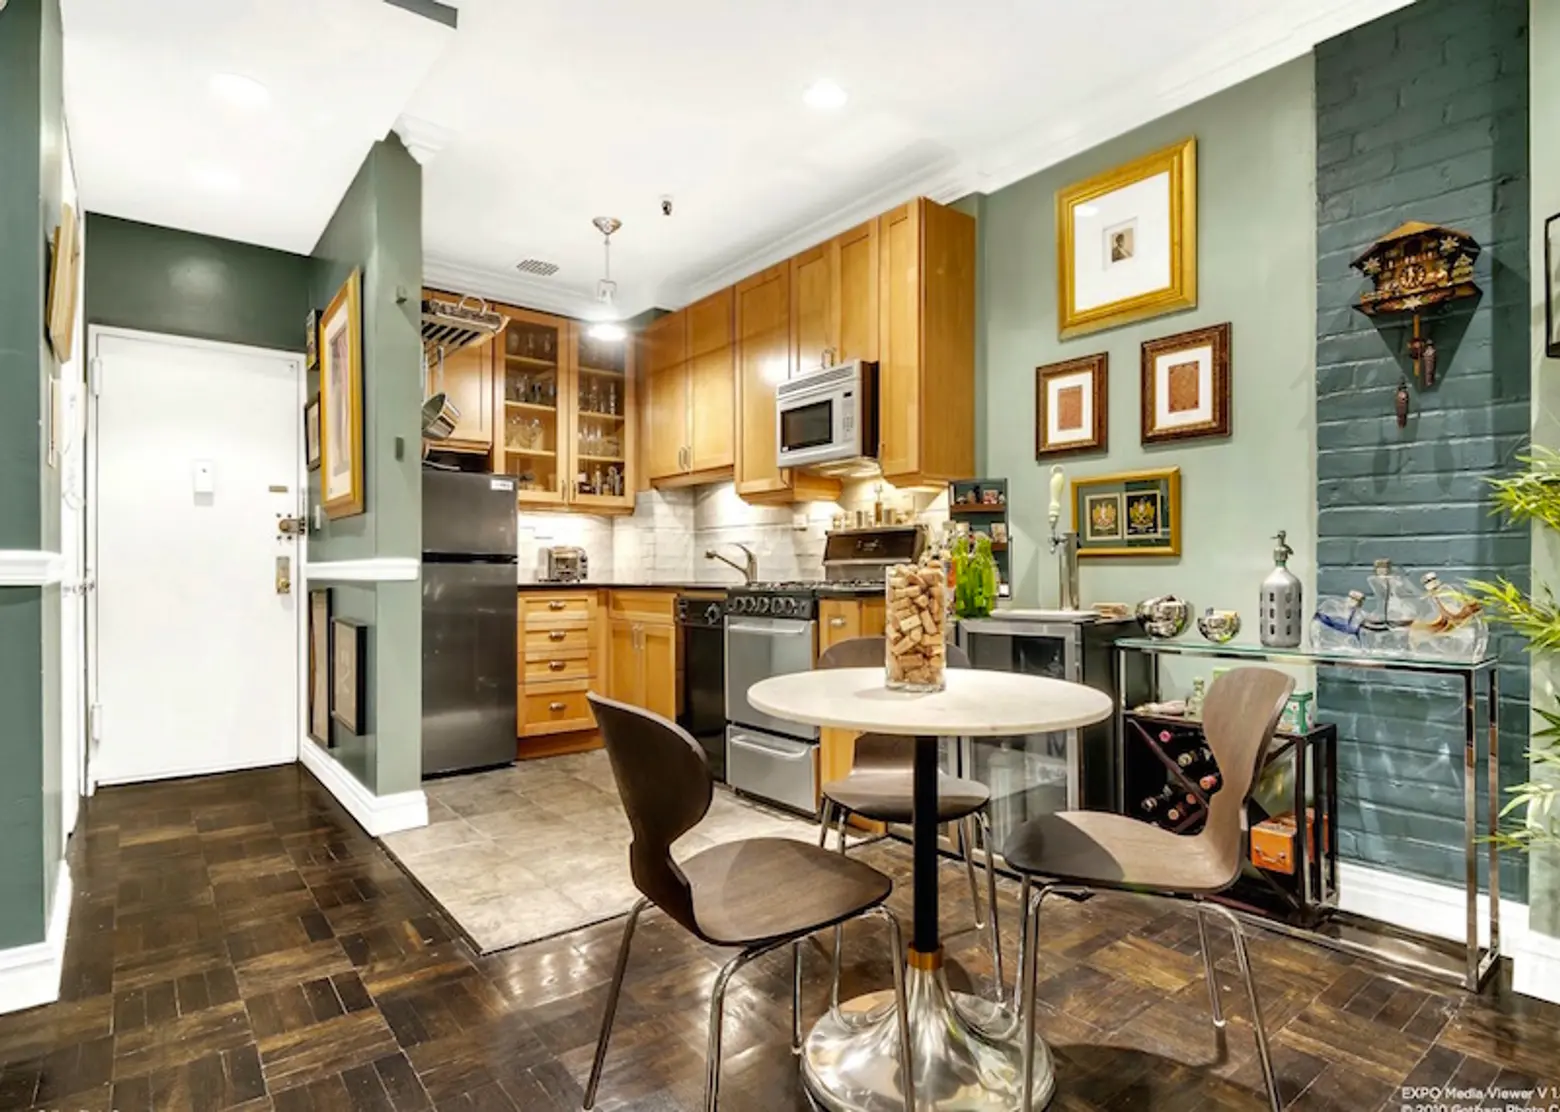 315 West 55th Street, Cool Listings, Midtown, Hells Kitchen, Clinton, NYC apartment for sale,